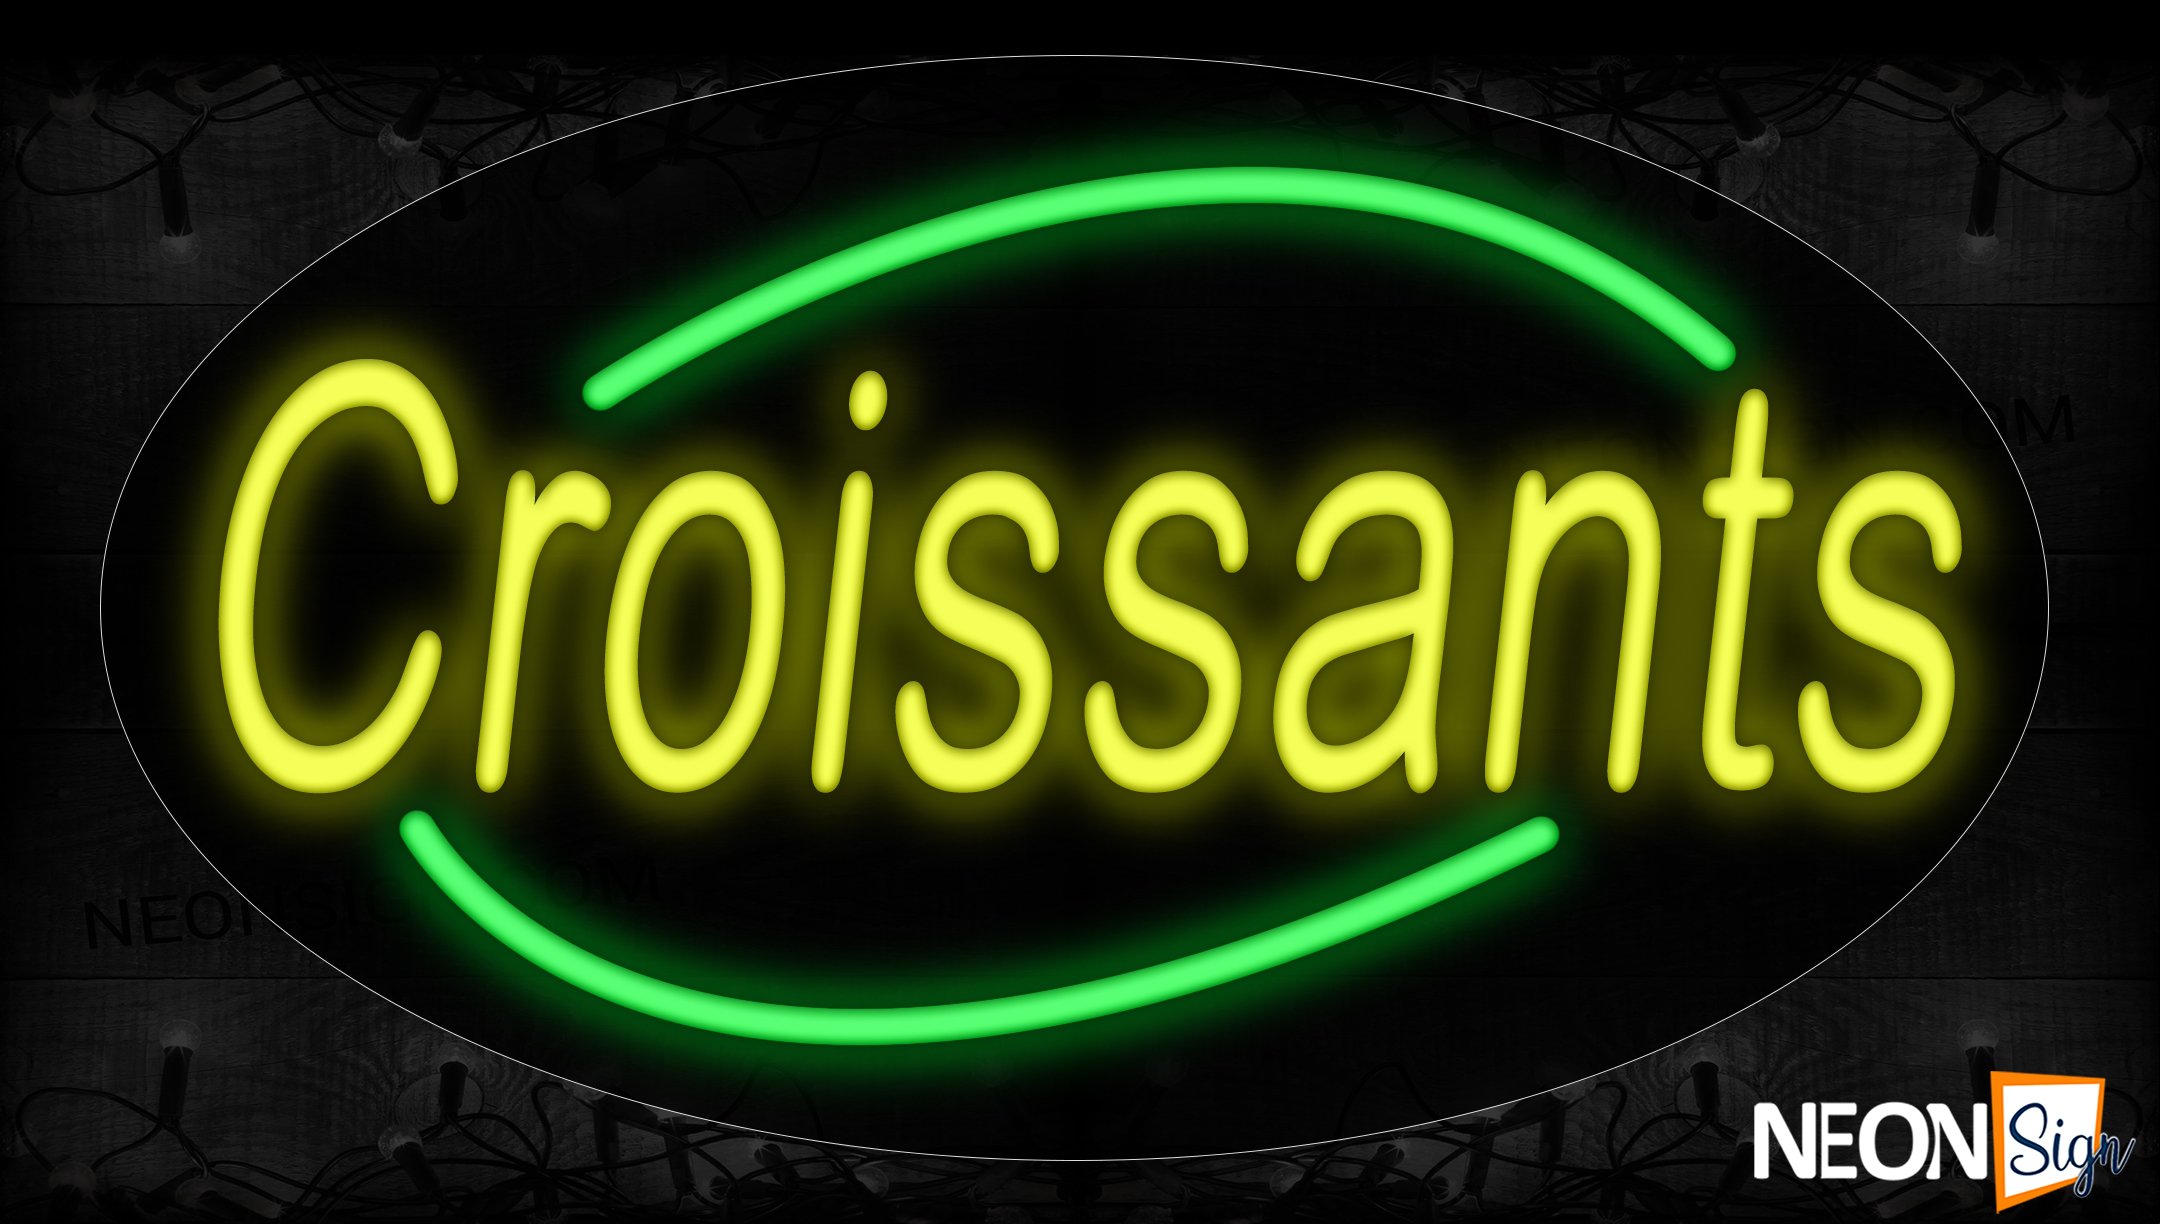 Image of 14096 Croissants In Yellow With Green Arc Border Neon Signs_17x30 Contoured Black Backing